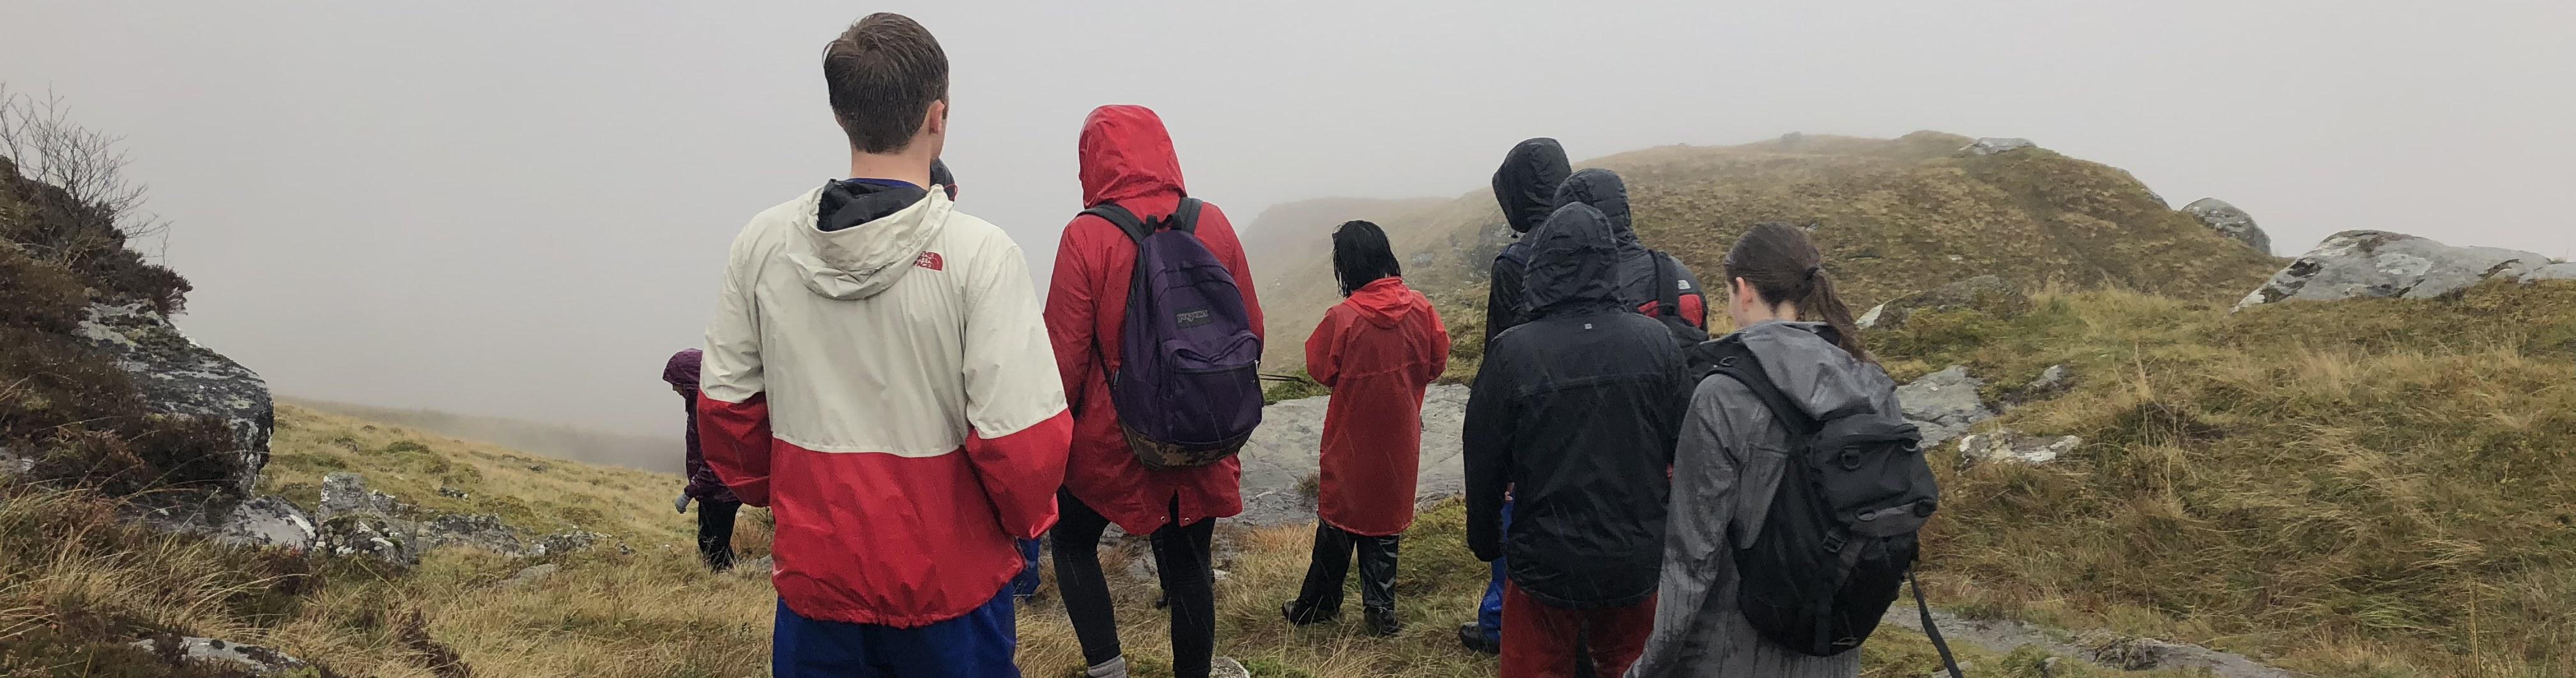 Group of students in jackets walking down hill in Scotland.